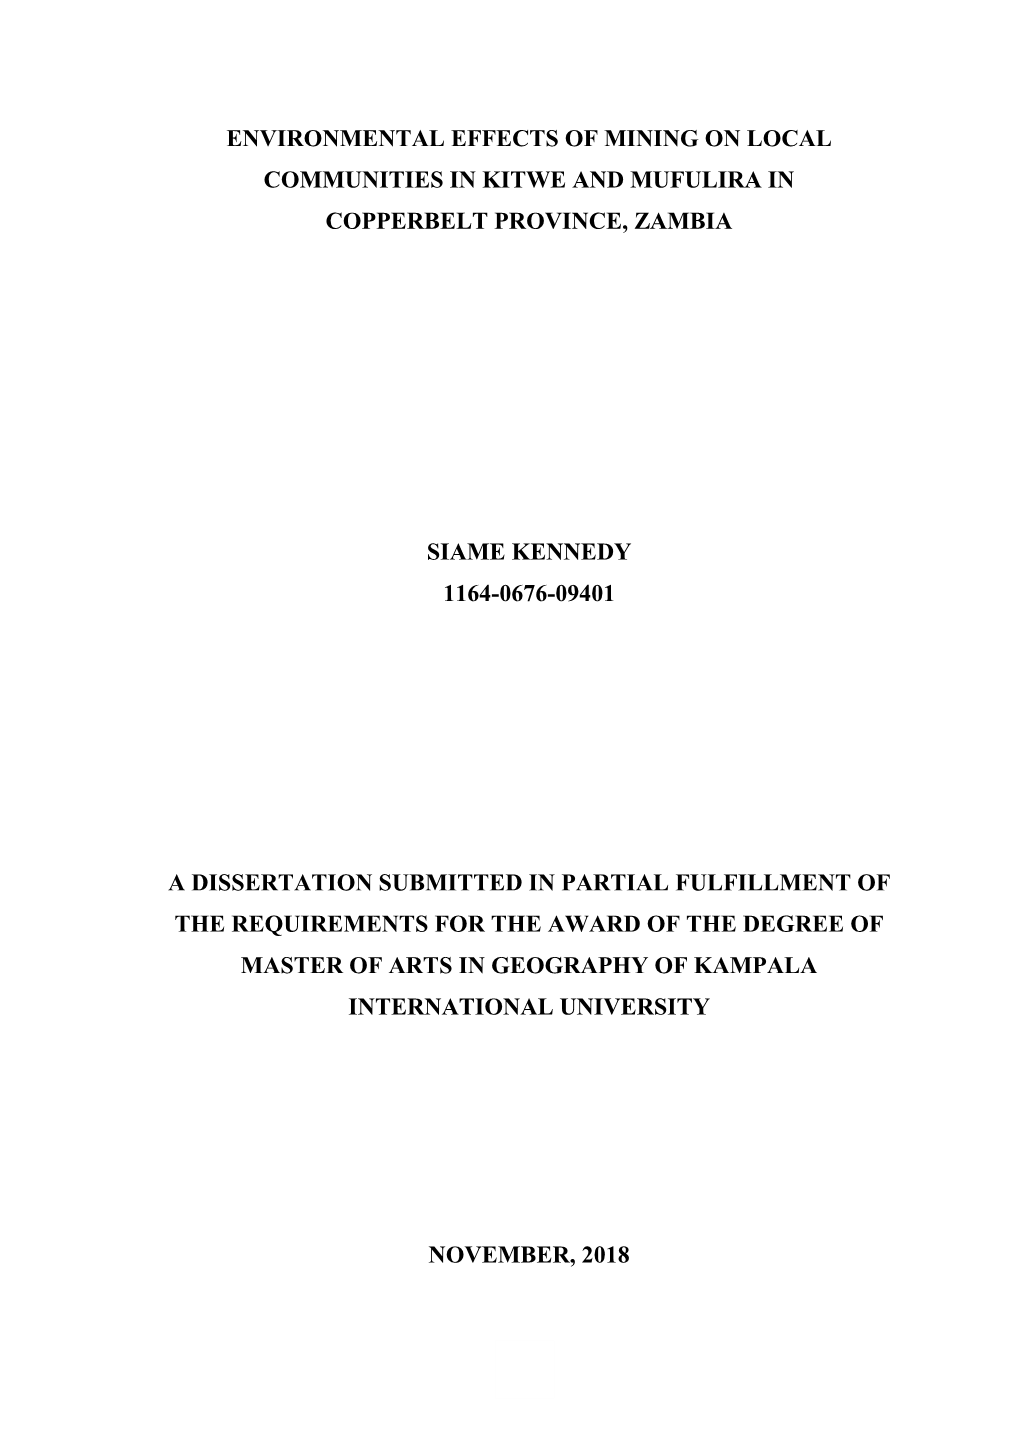 Environmental Effects of Mining on Local Communities in Kitwe and Mufulira in Copperbelt Province, Zambia Siame Kennedy 1164-067